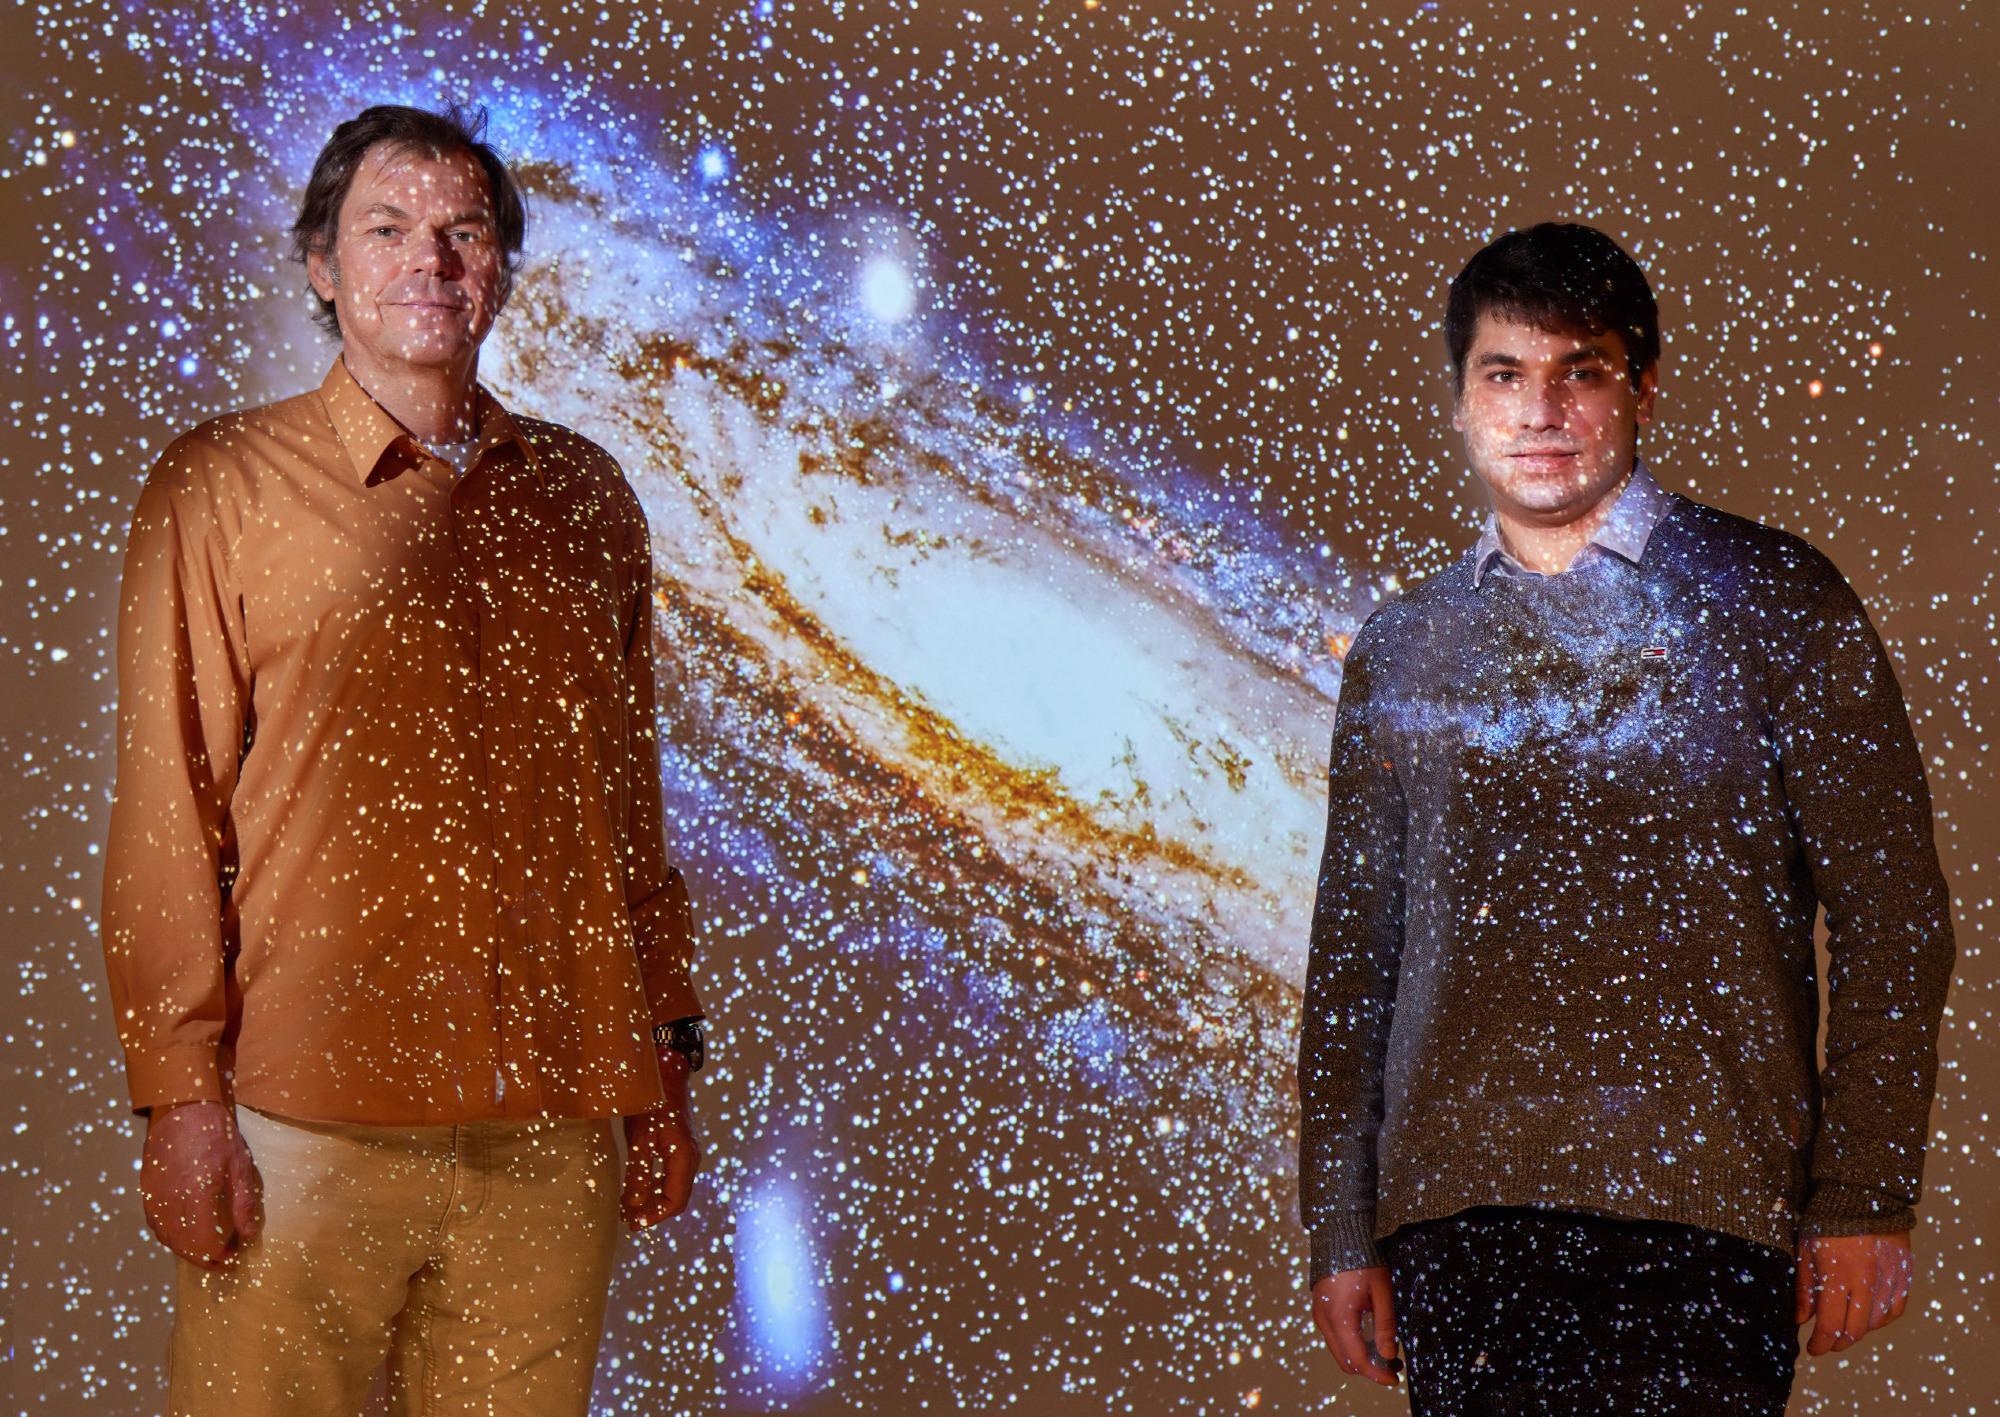 Prof. Dr. Pavel Kroupa (left) and Moritz Haslbauer (right) - with a projection of the Andromeda galaxy.